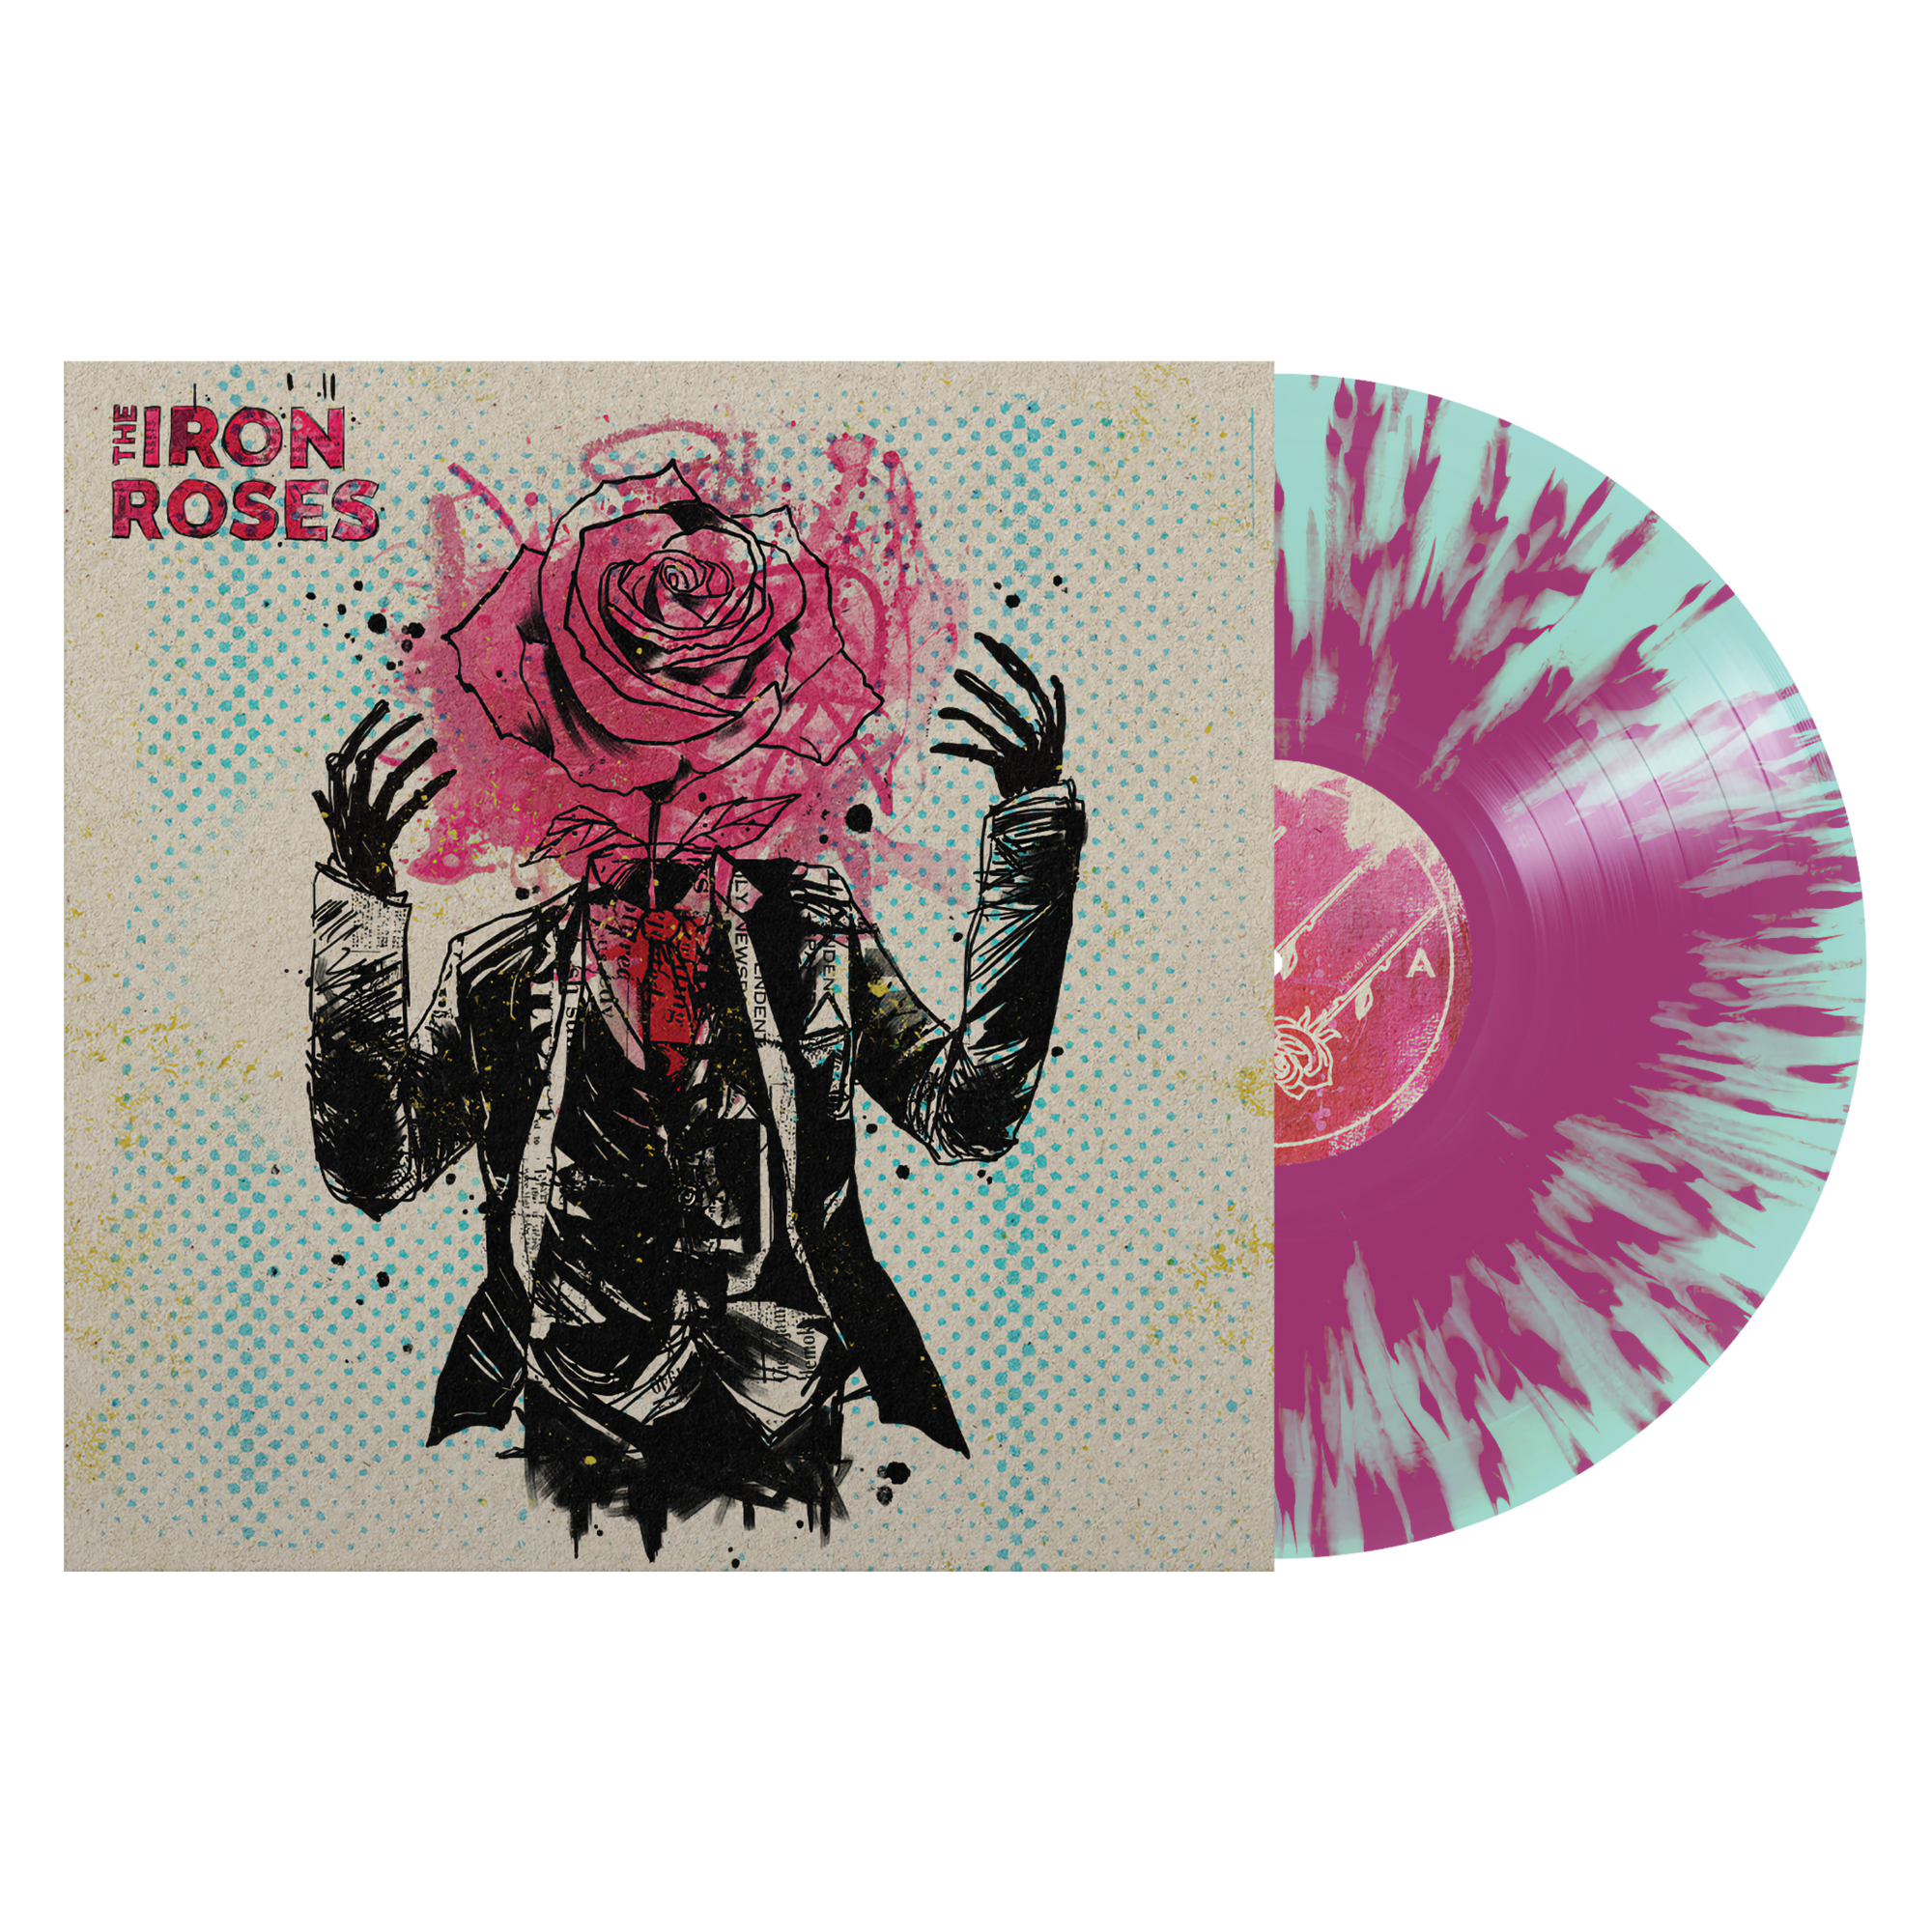 TheIronRoses-Vinyl-ElectricBluewithPinkSplatter_2000x.png